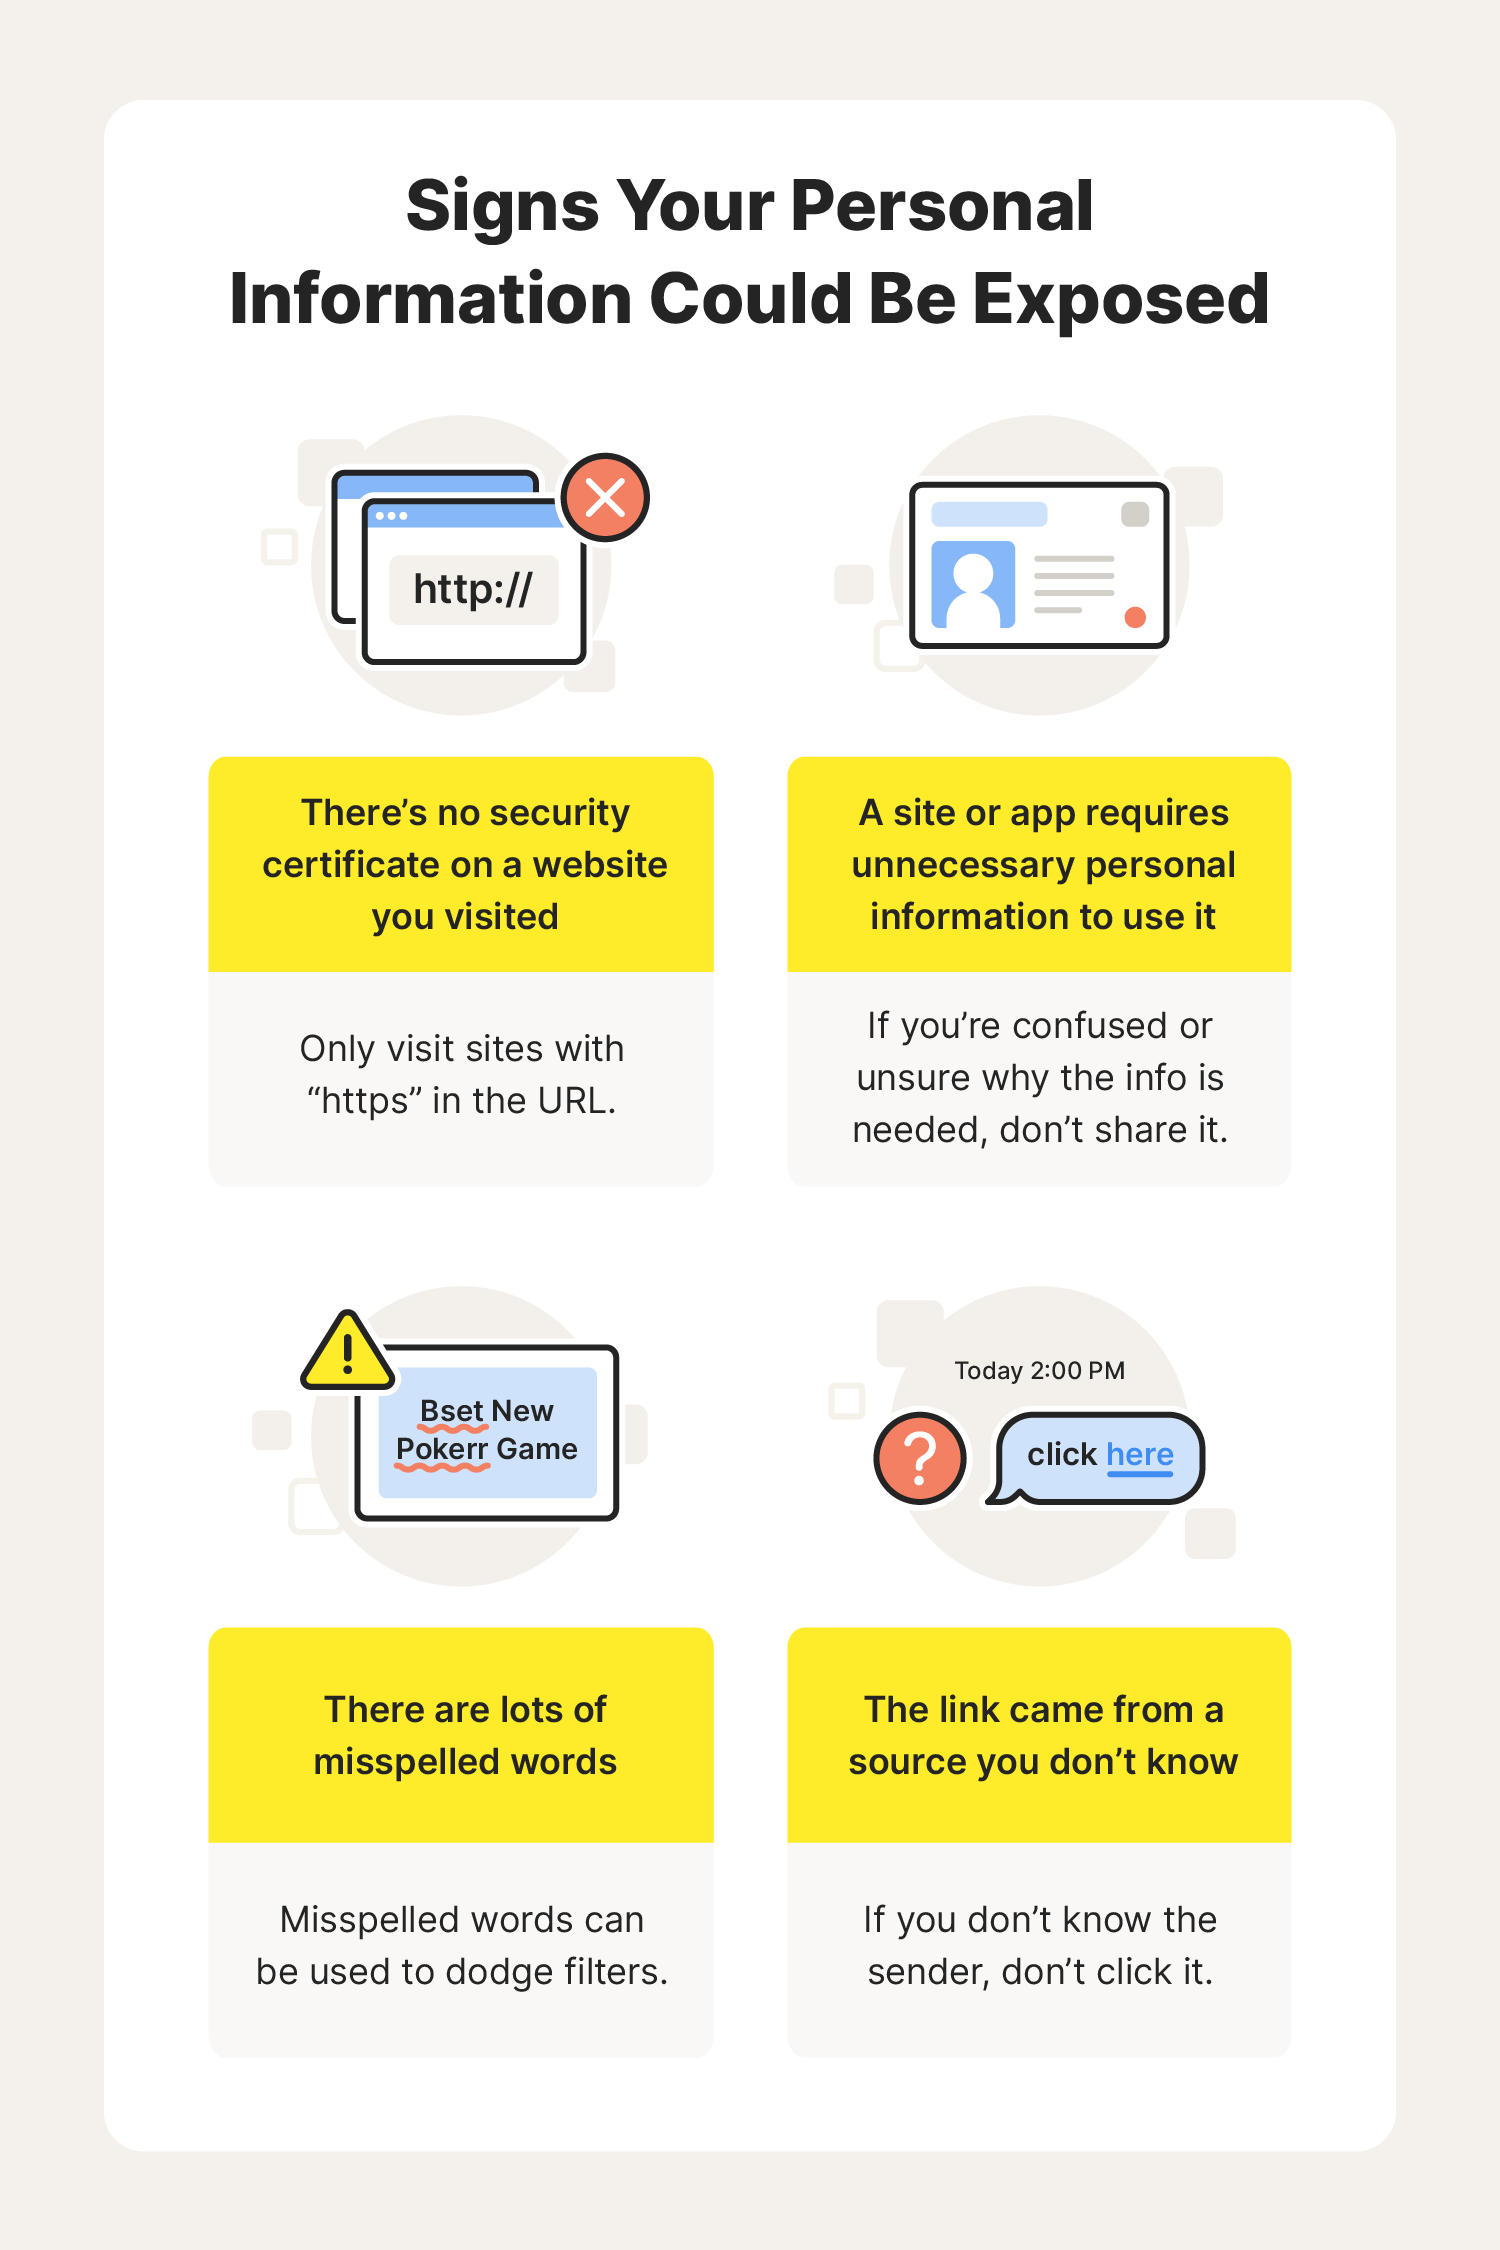 A graphic showcases warning signs that your information could be exposed, leading many to want to learn how to remove personal information from the internet.